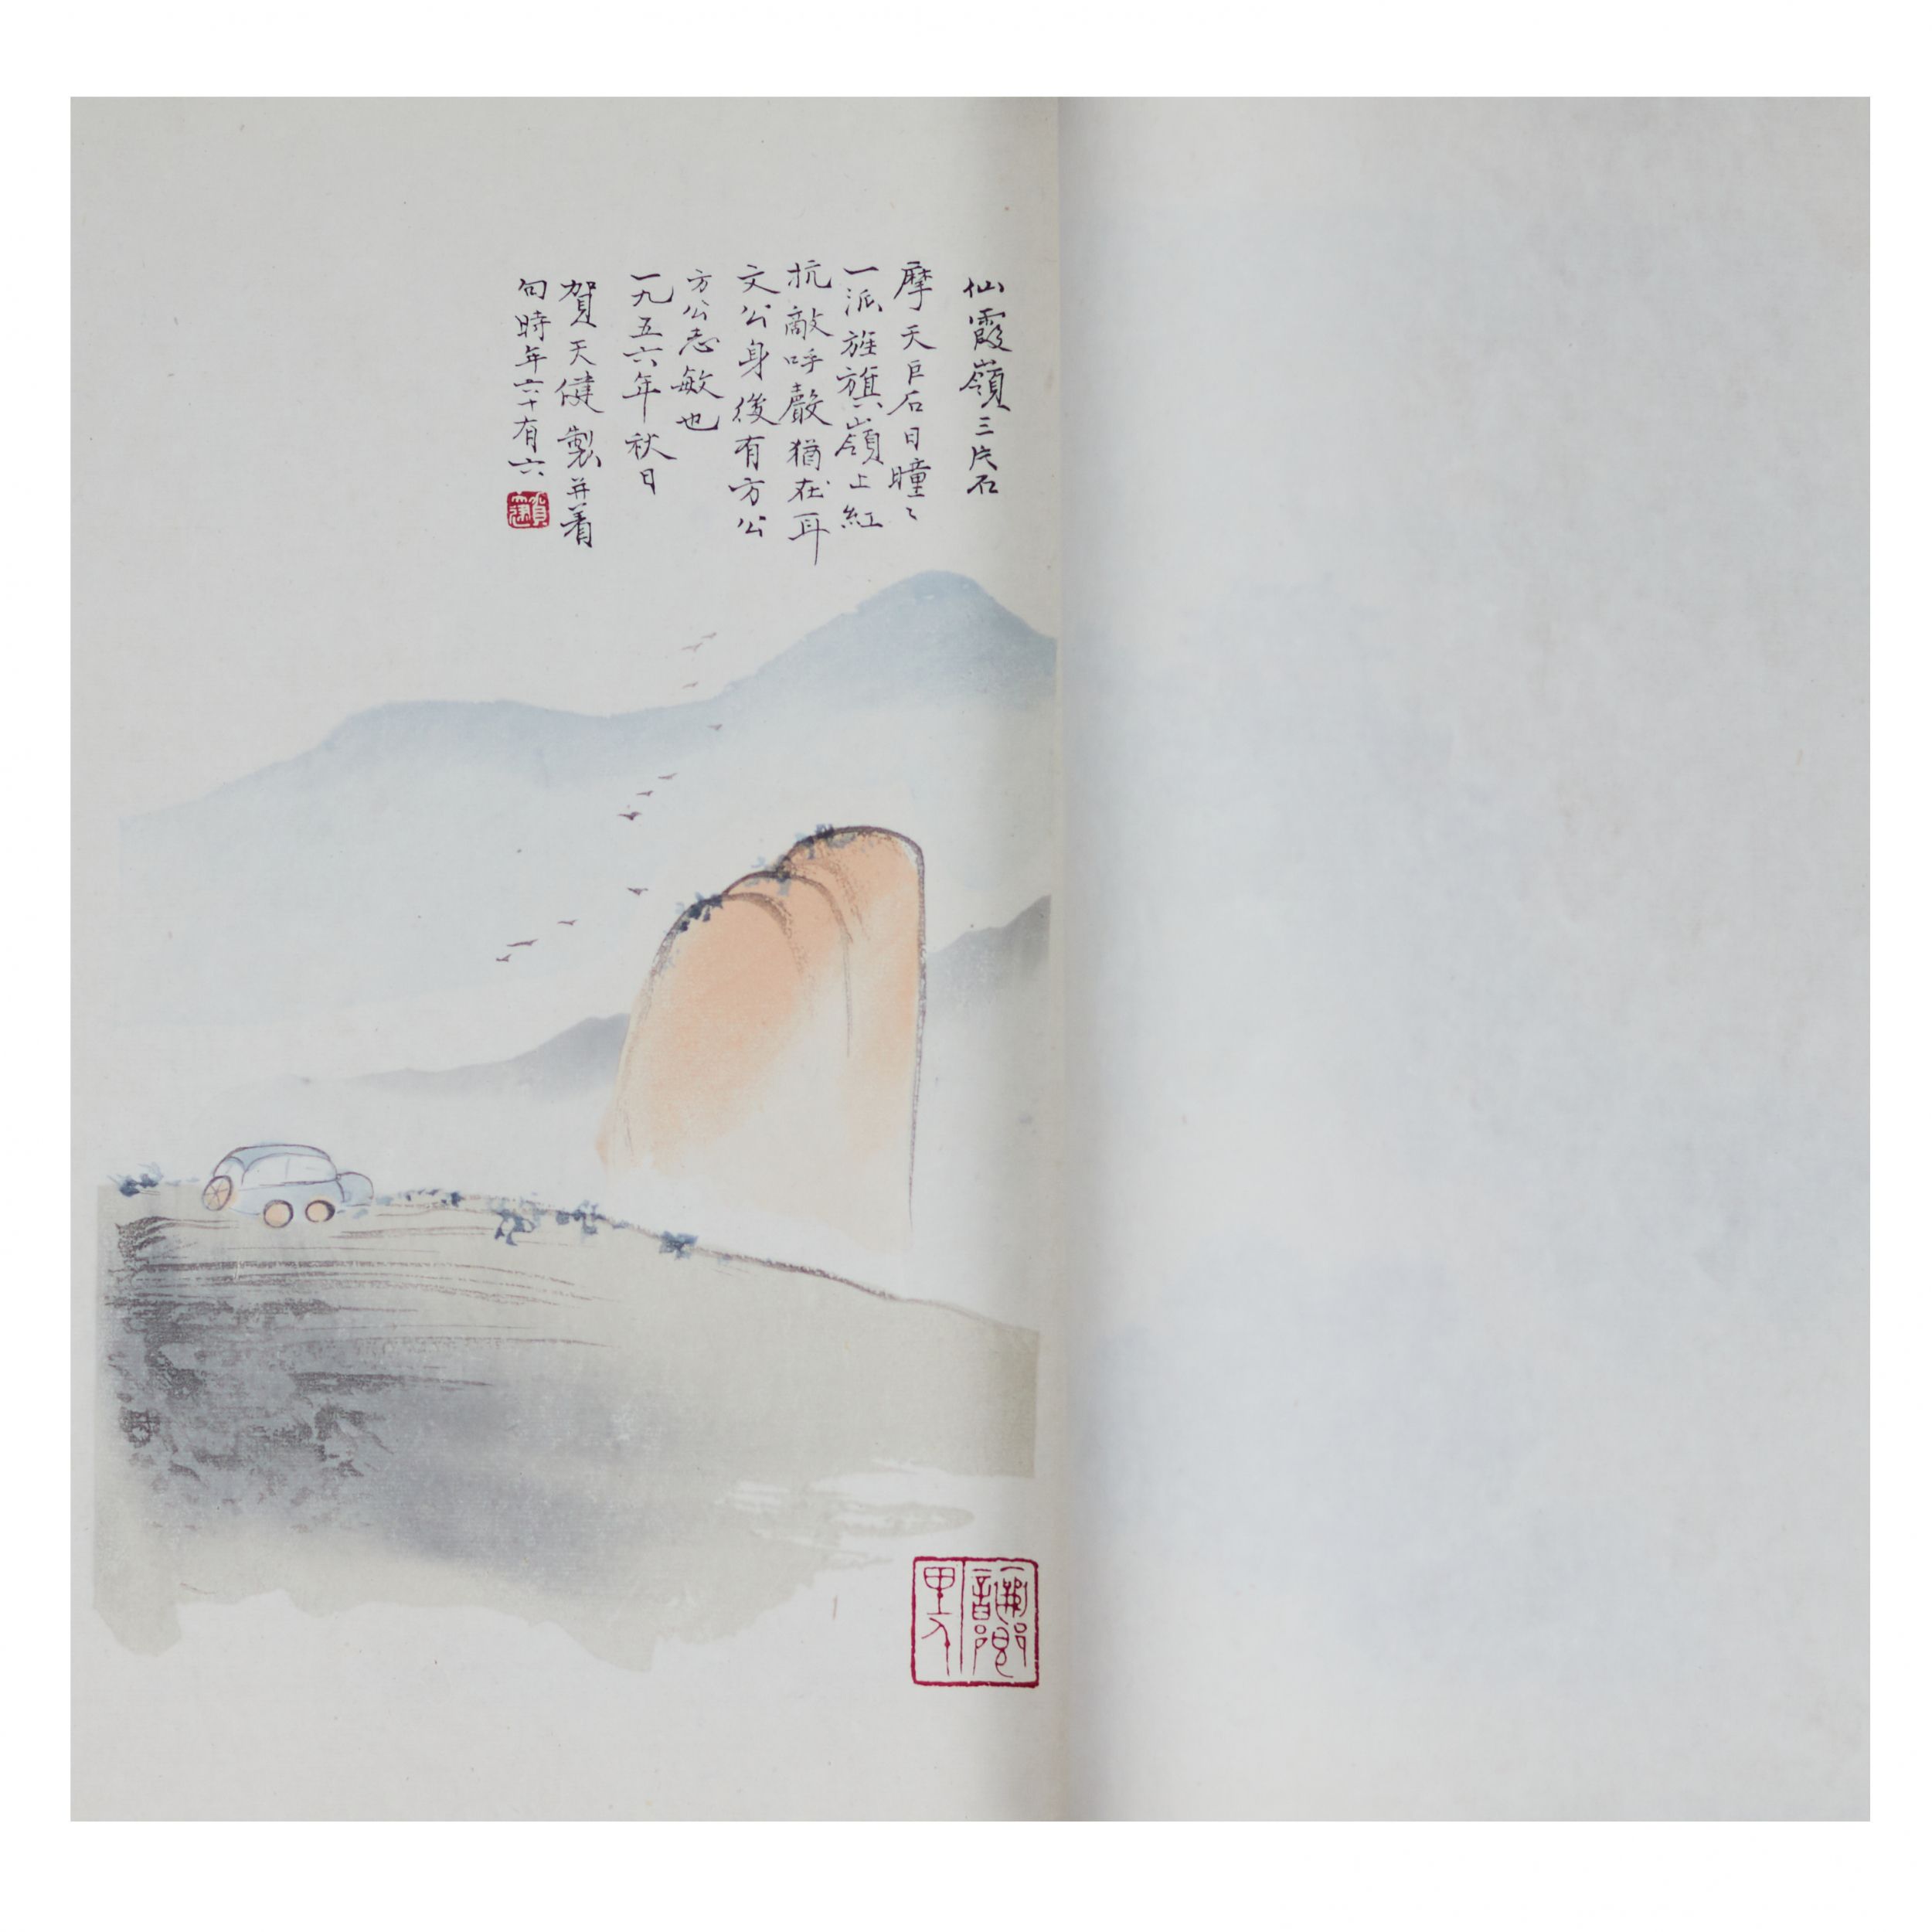 Collection of Chinese paintings by Guo-Hua, edited by Guo Mozhuo. China. 20th century. - Image 3 of 14